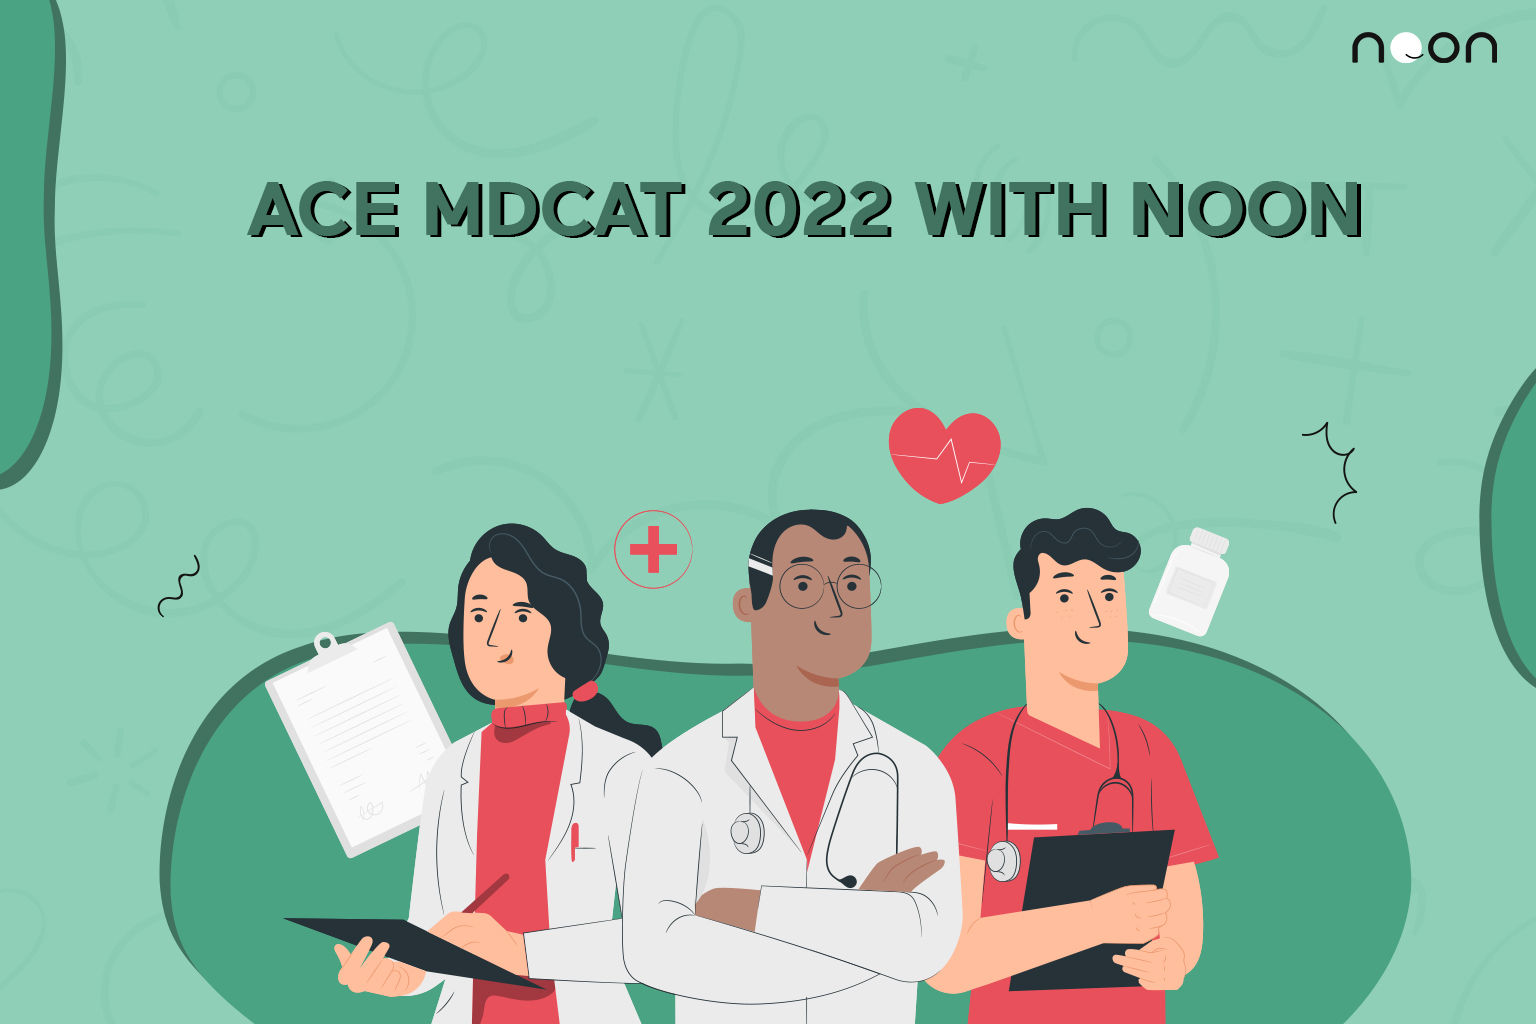 Ace MDCAT with noon